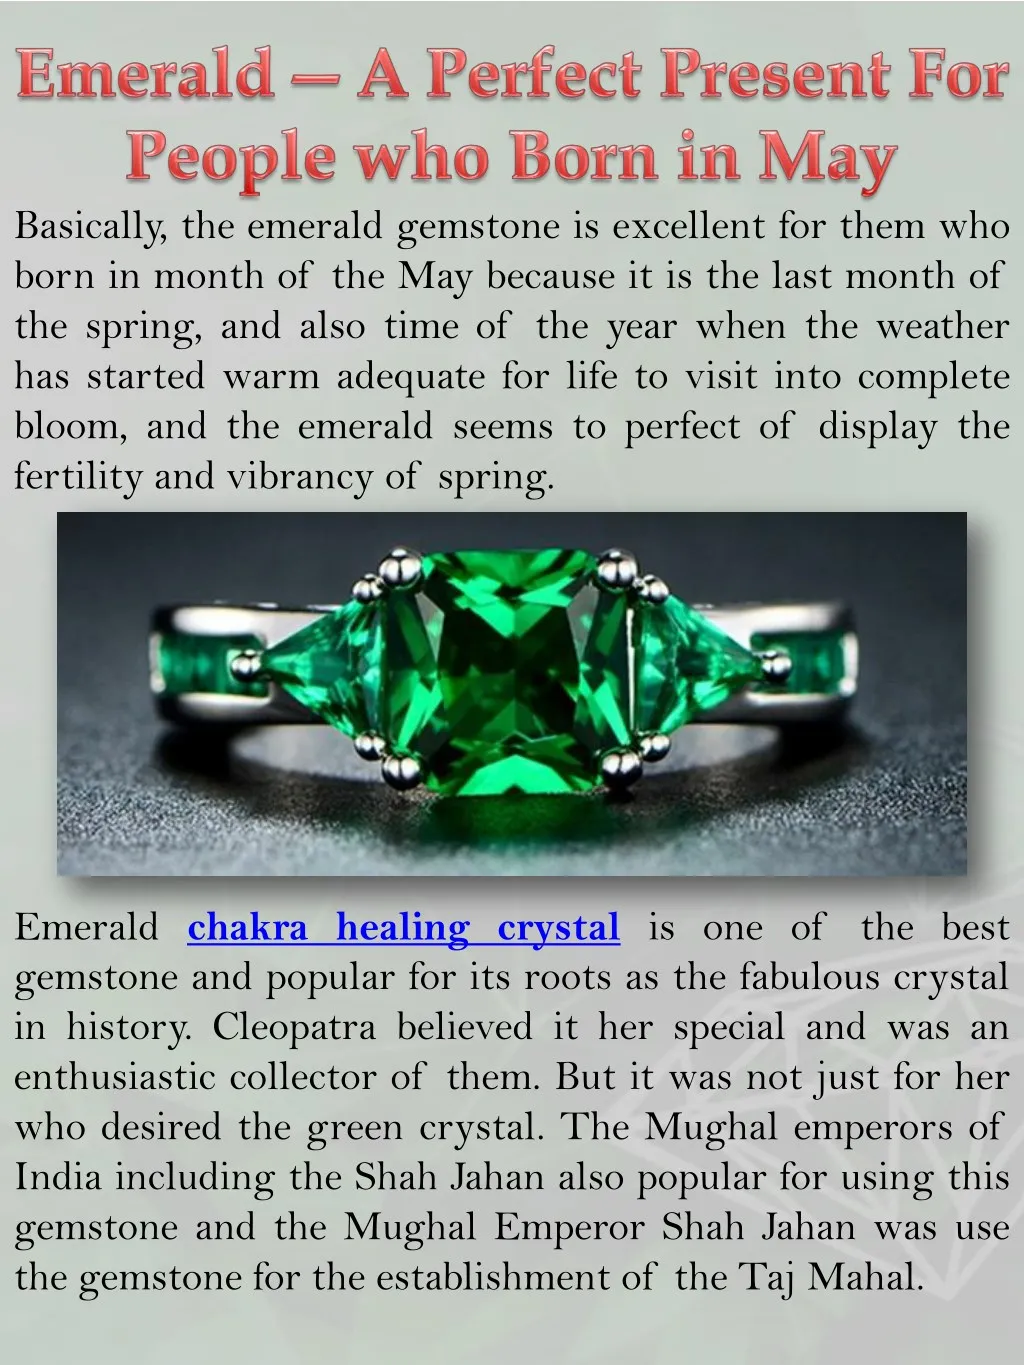 basically the emerald gemstone is excellent